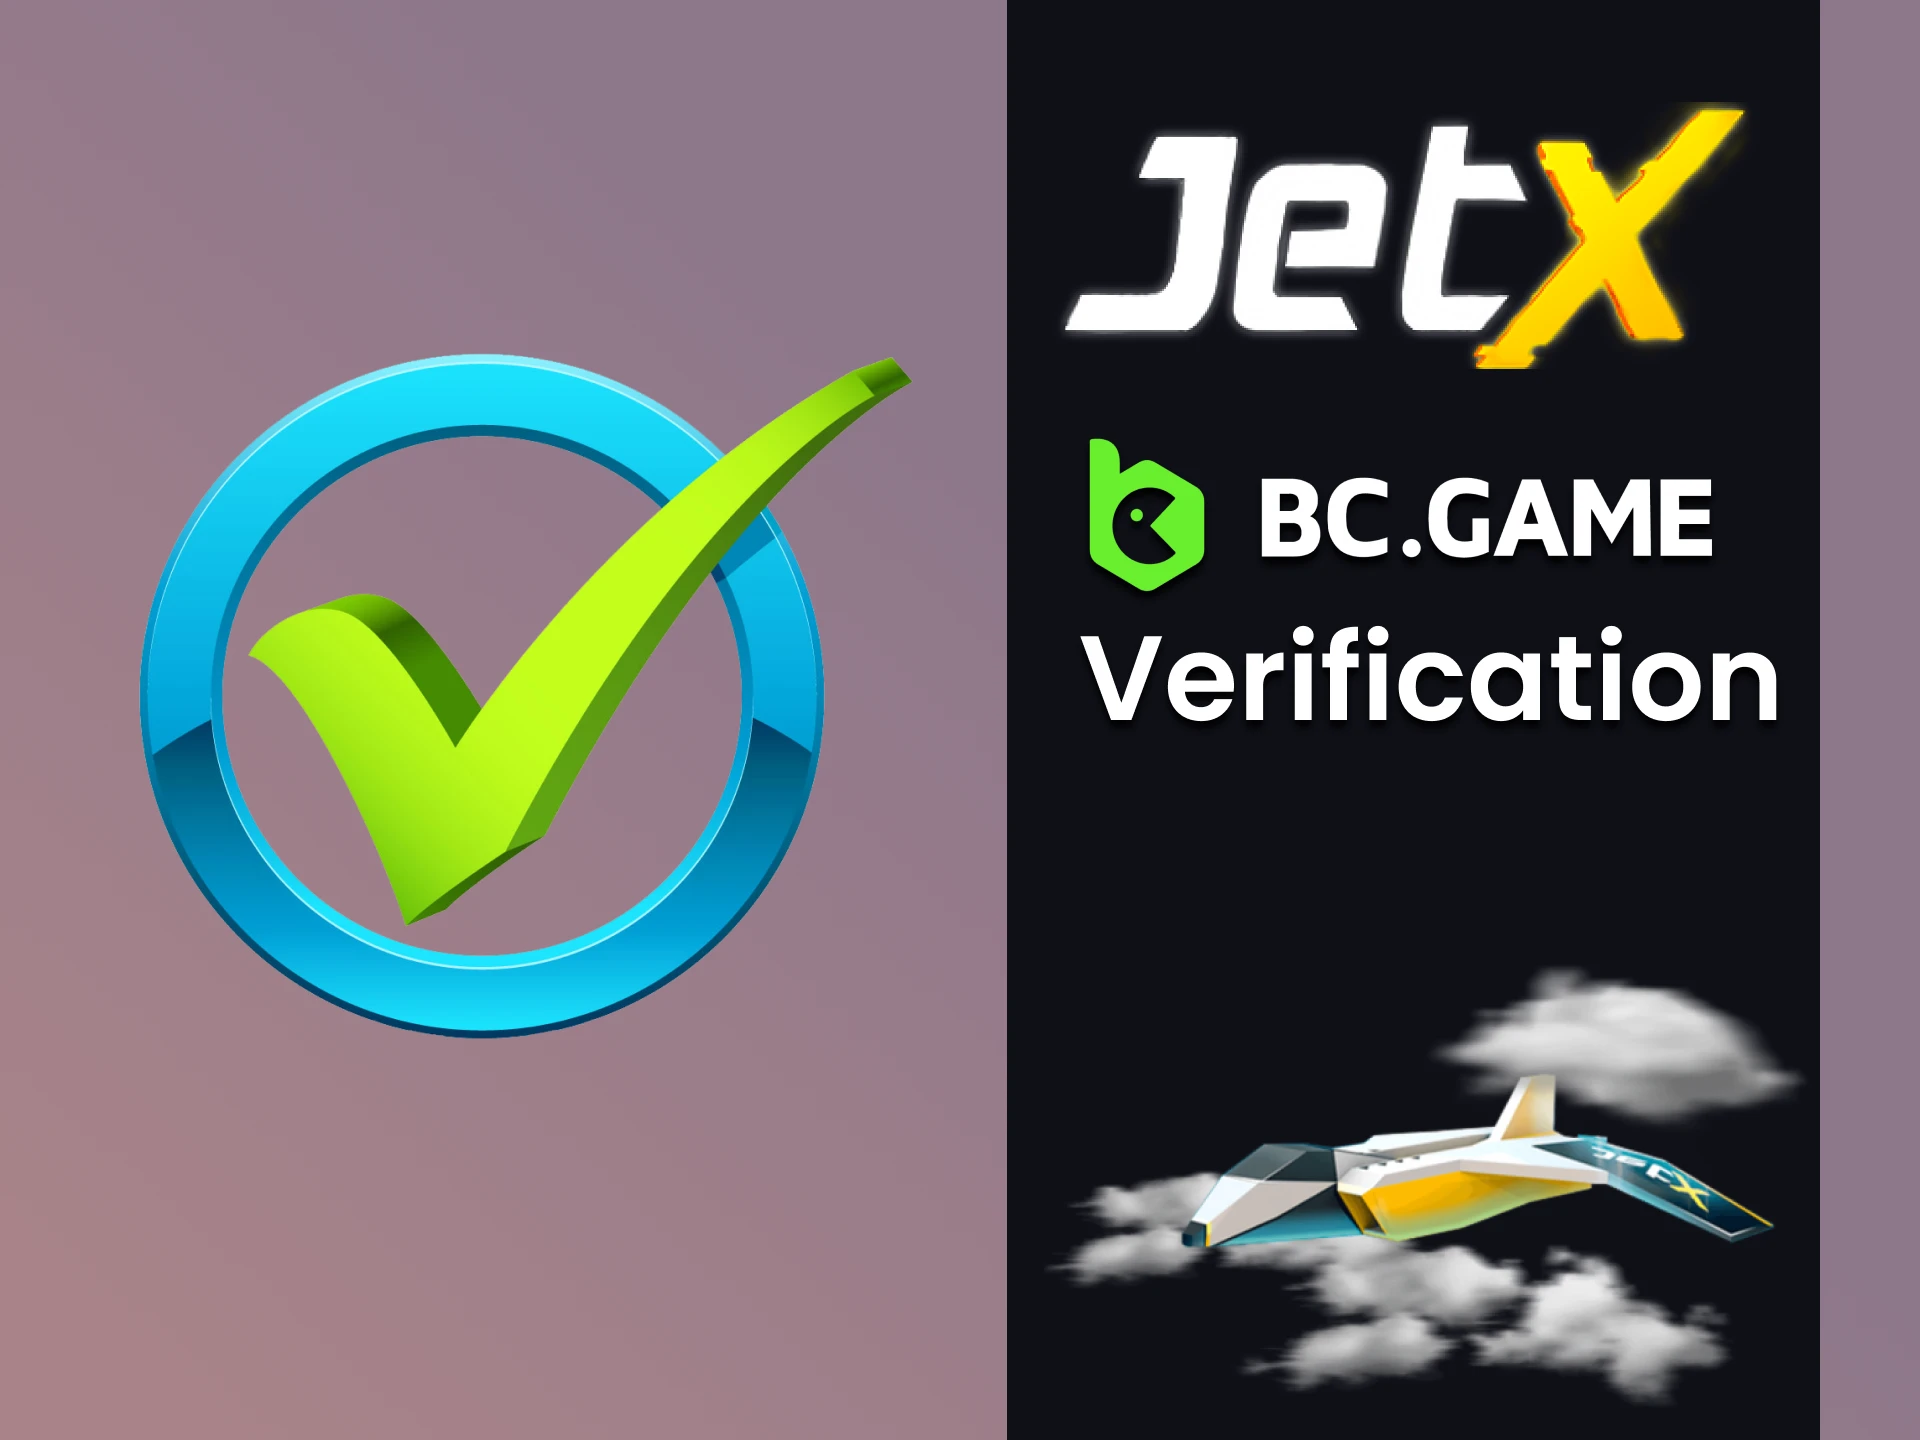 Fill out all the information on the BC Game website to play JetX.